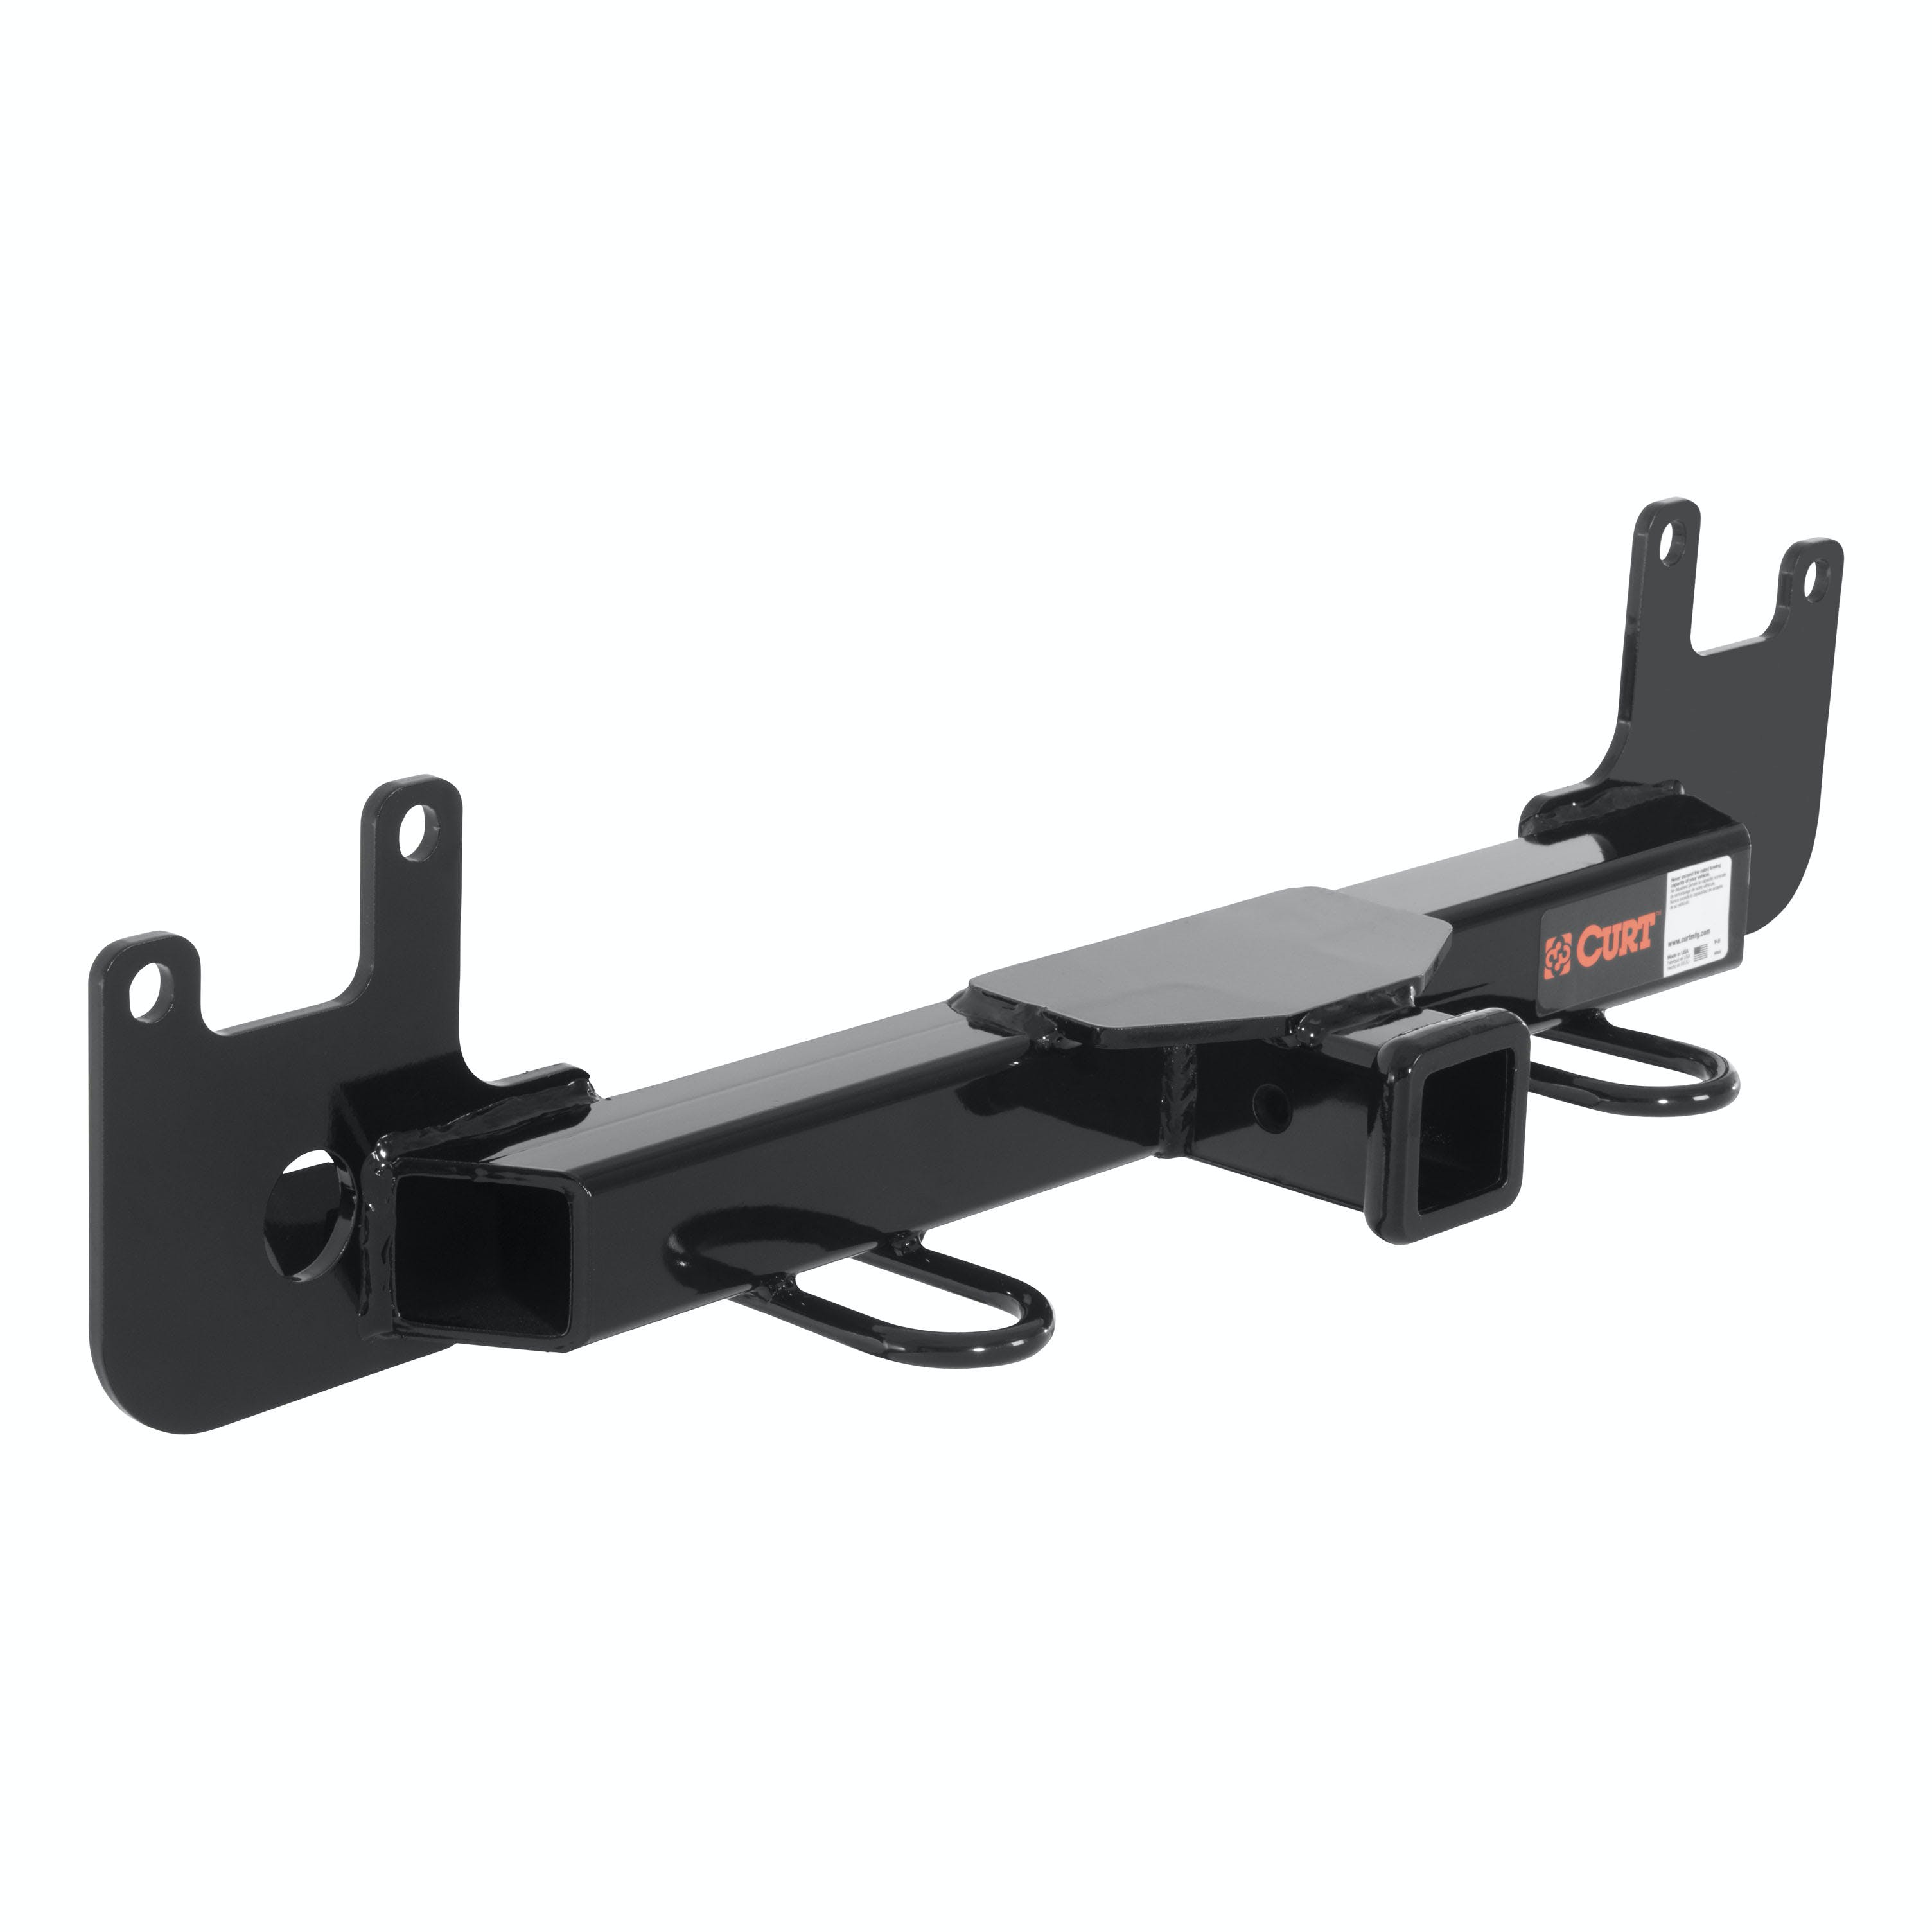 CURT 31367 2 Front Receiver Hitch, Select Toyota 4Runner, FJ Cruiser